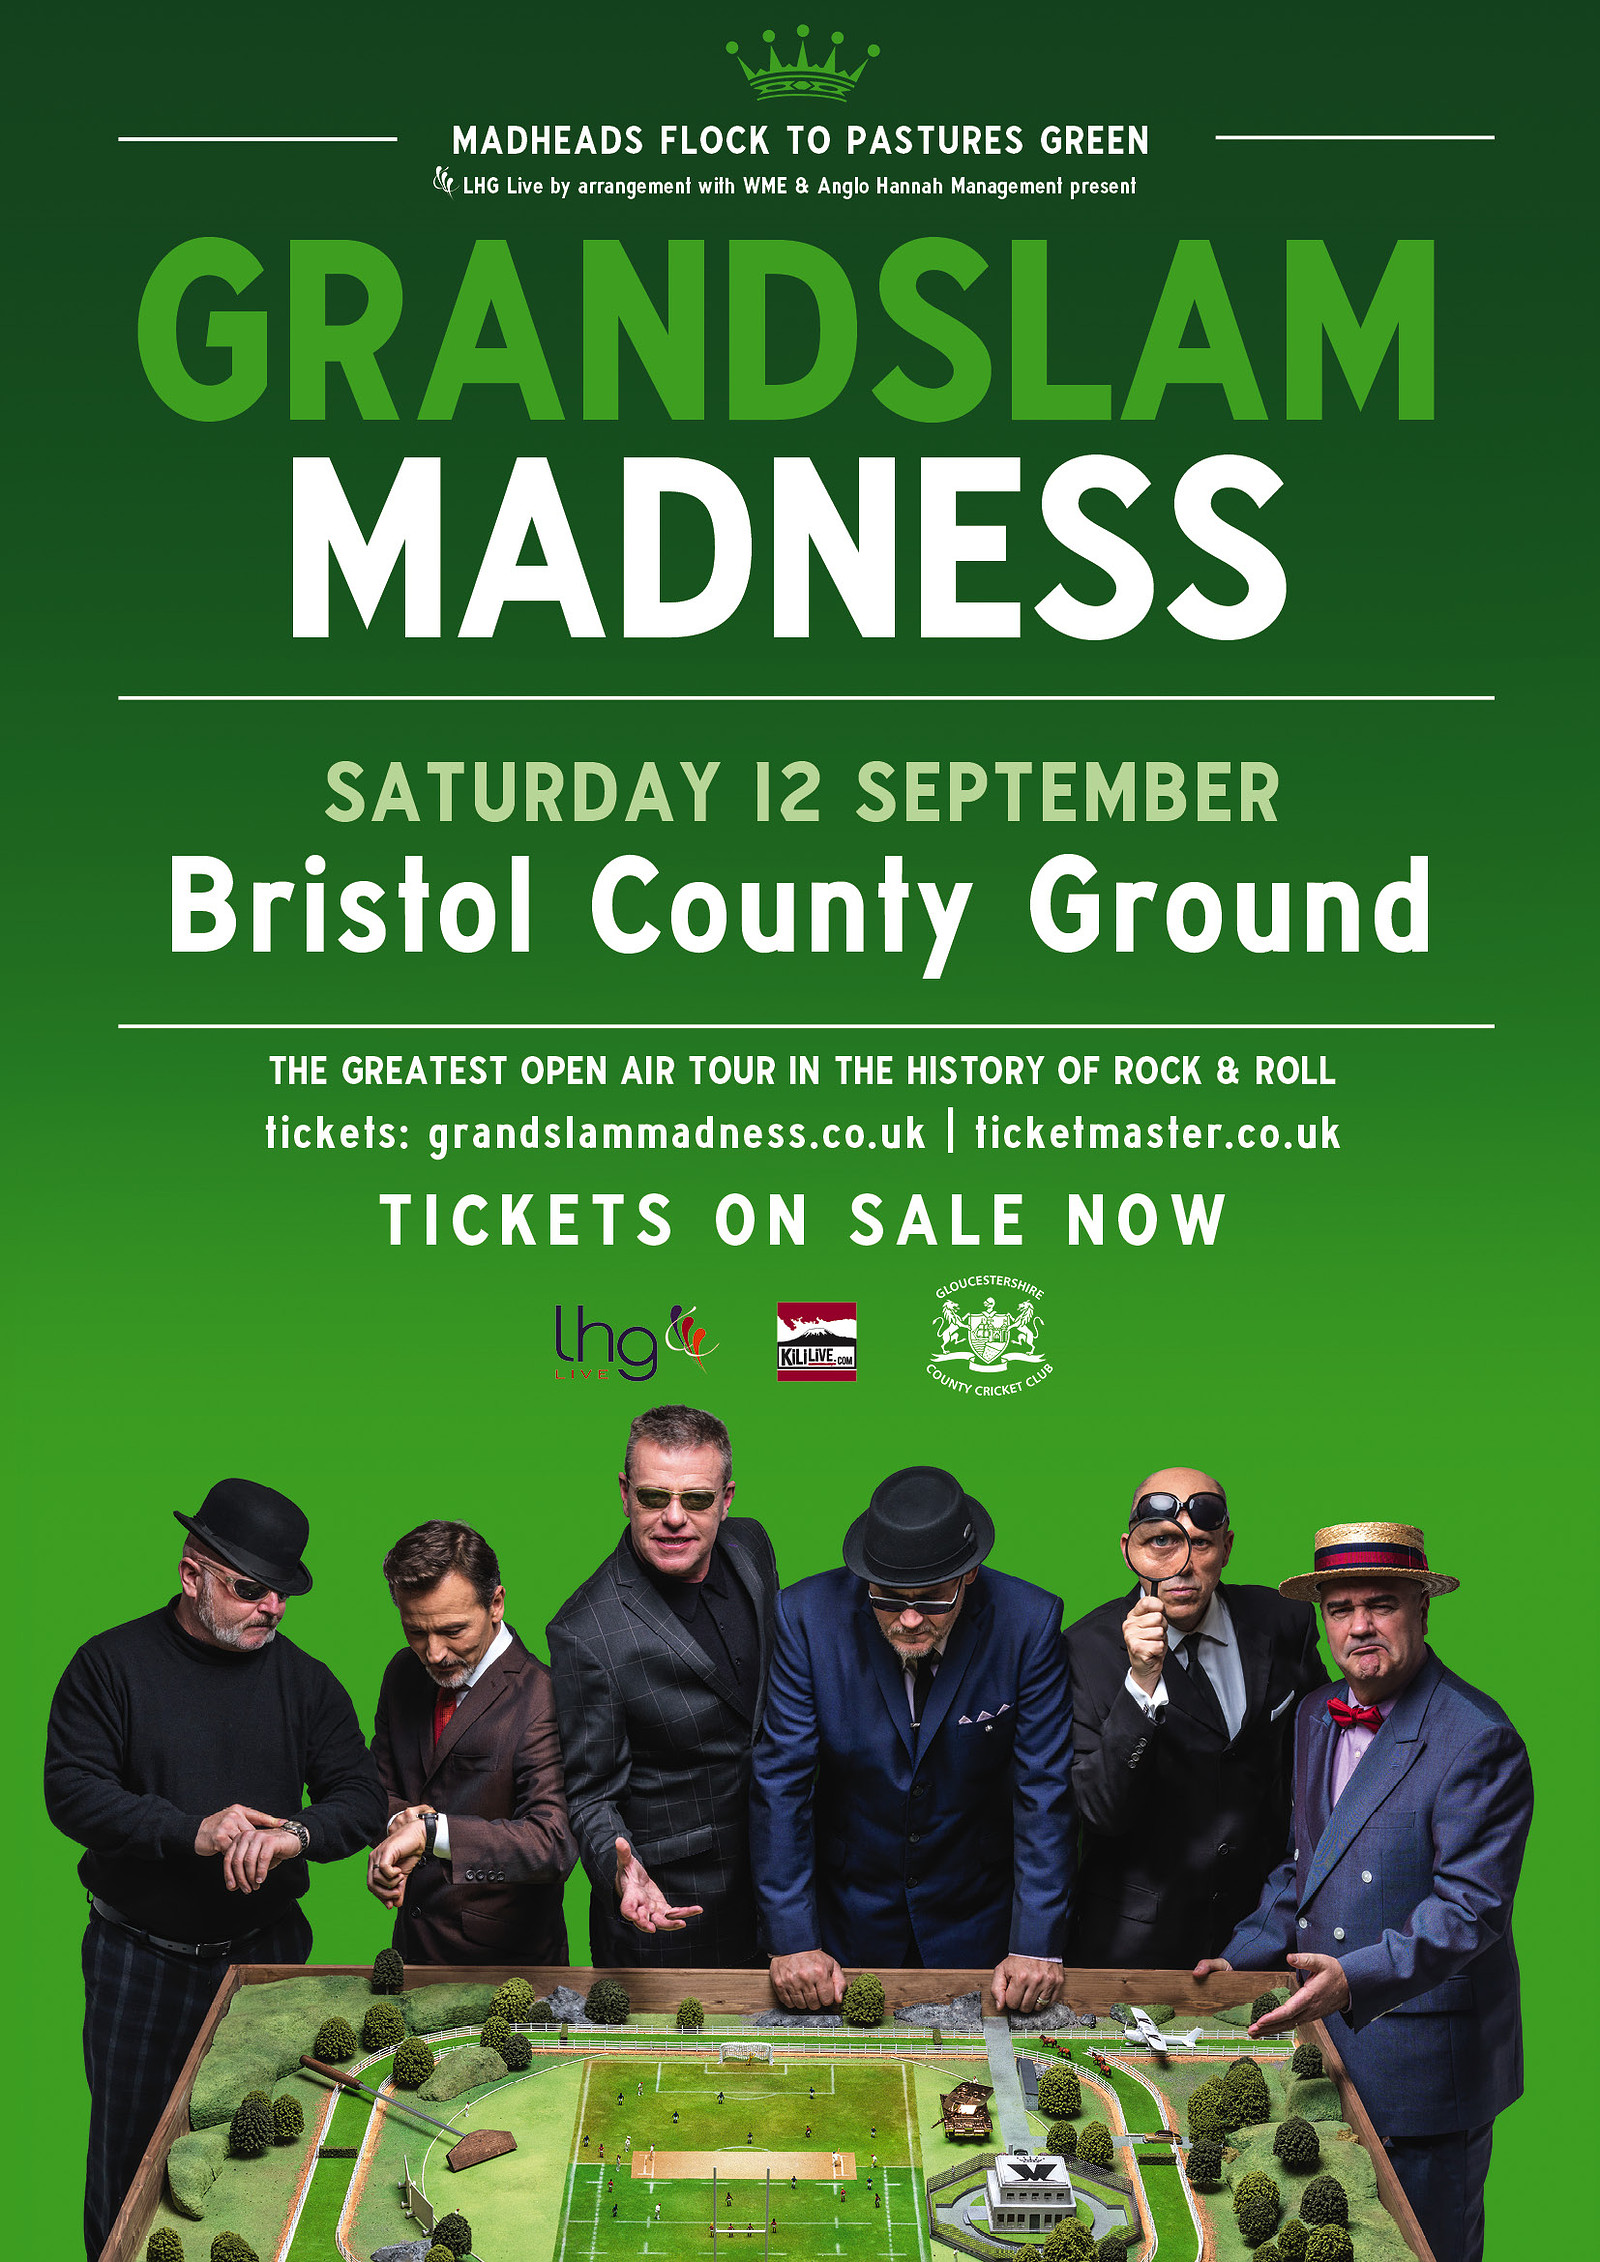 Grandslam Madness at Bristol County Ground